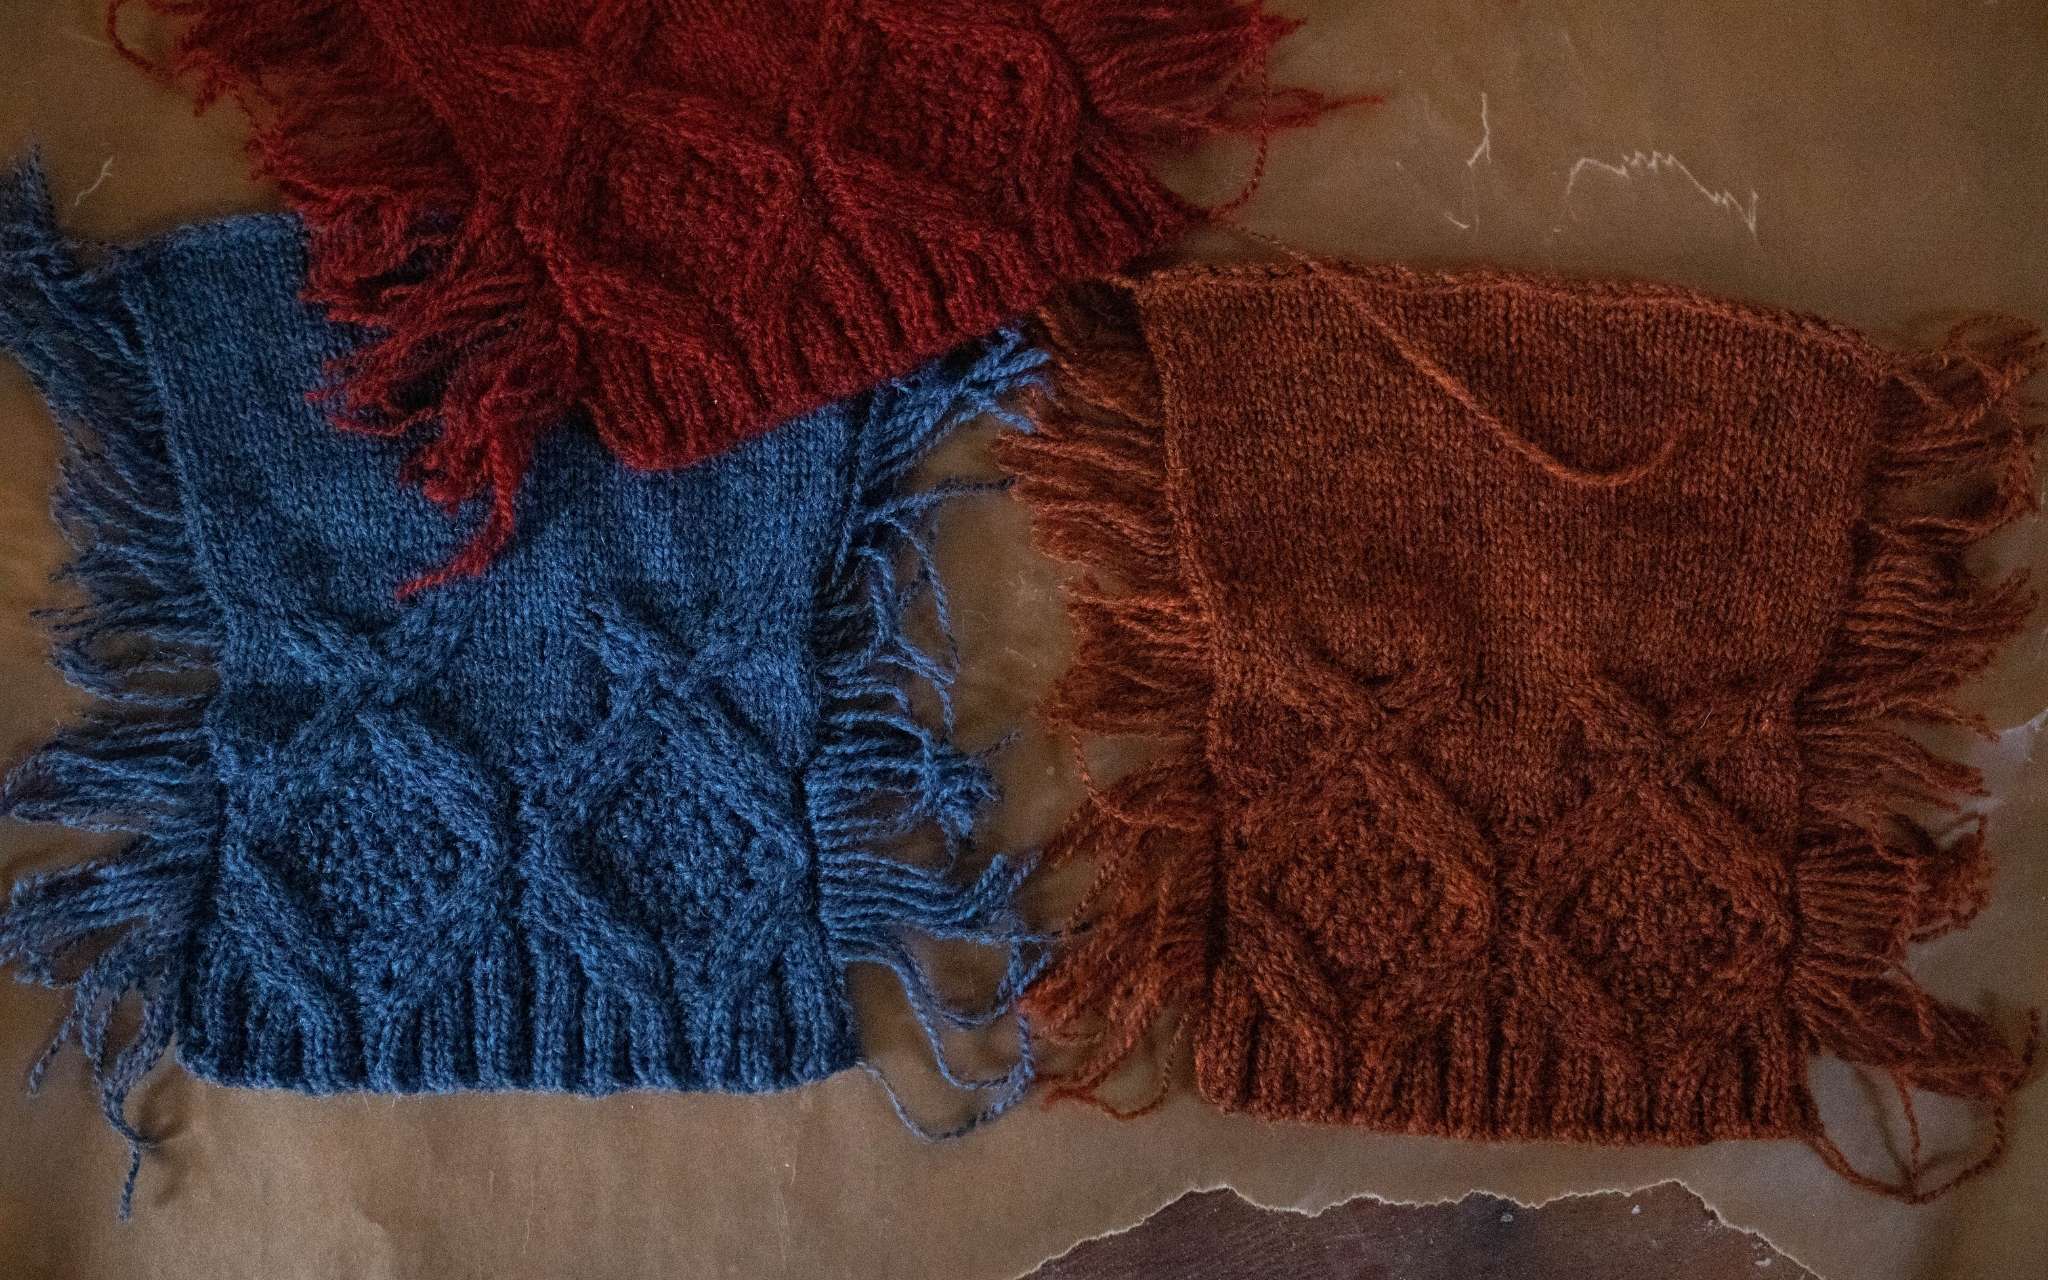 Blue and orange cabled swatches lie next to each other on a flat surface, with a red cabled swatch overlapping slightly at the top.